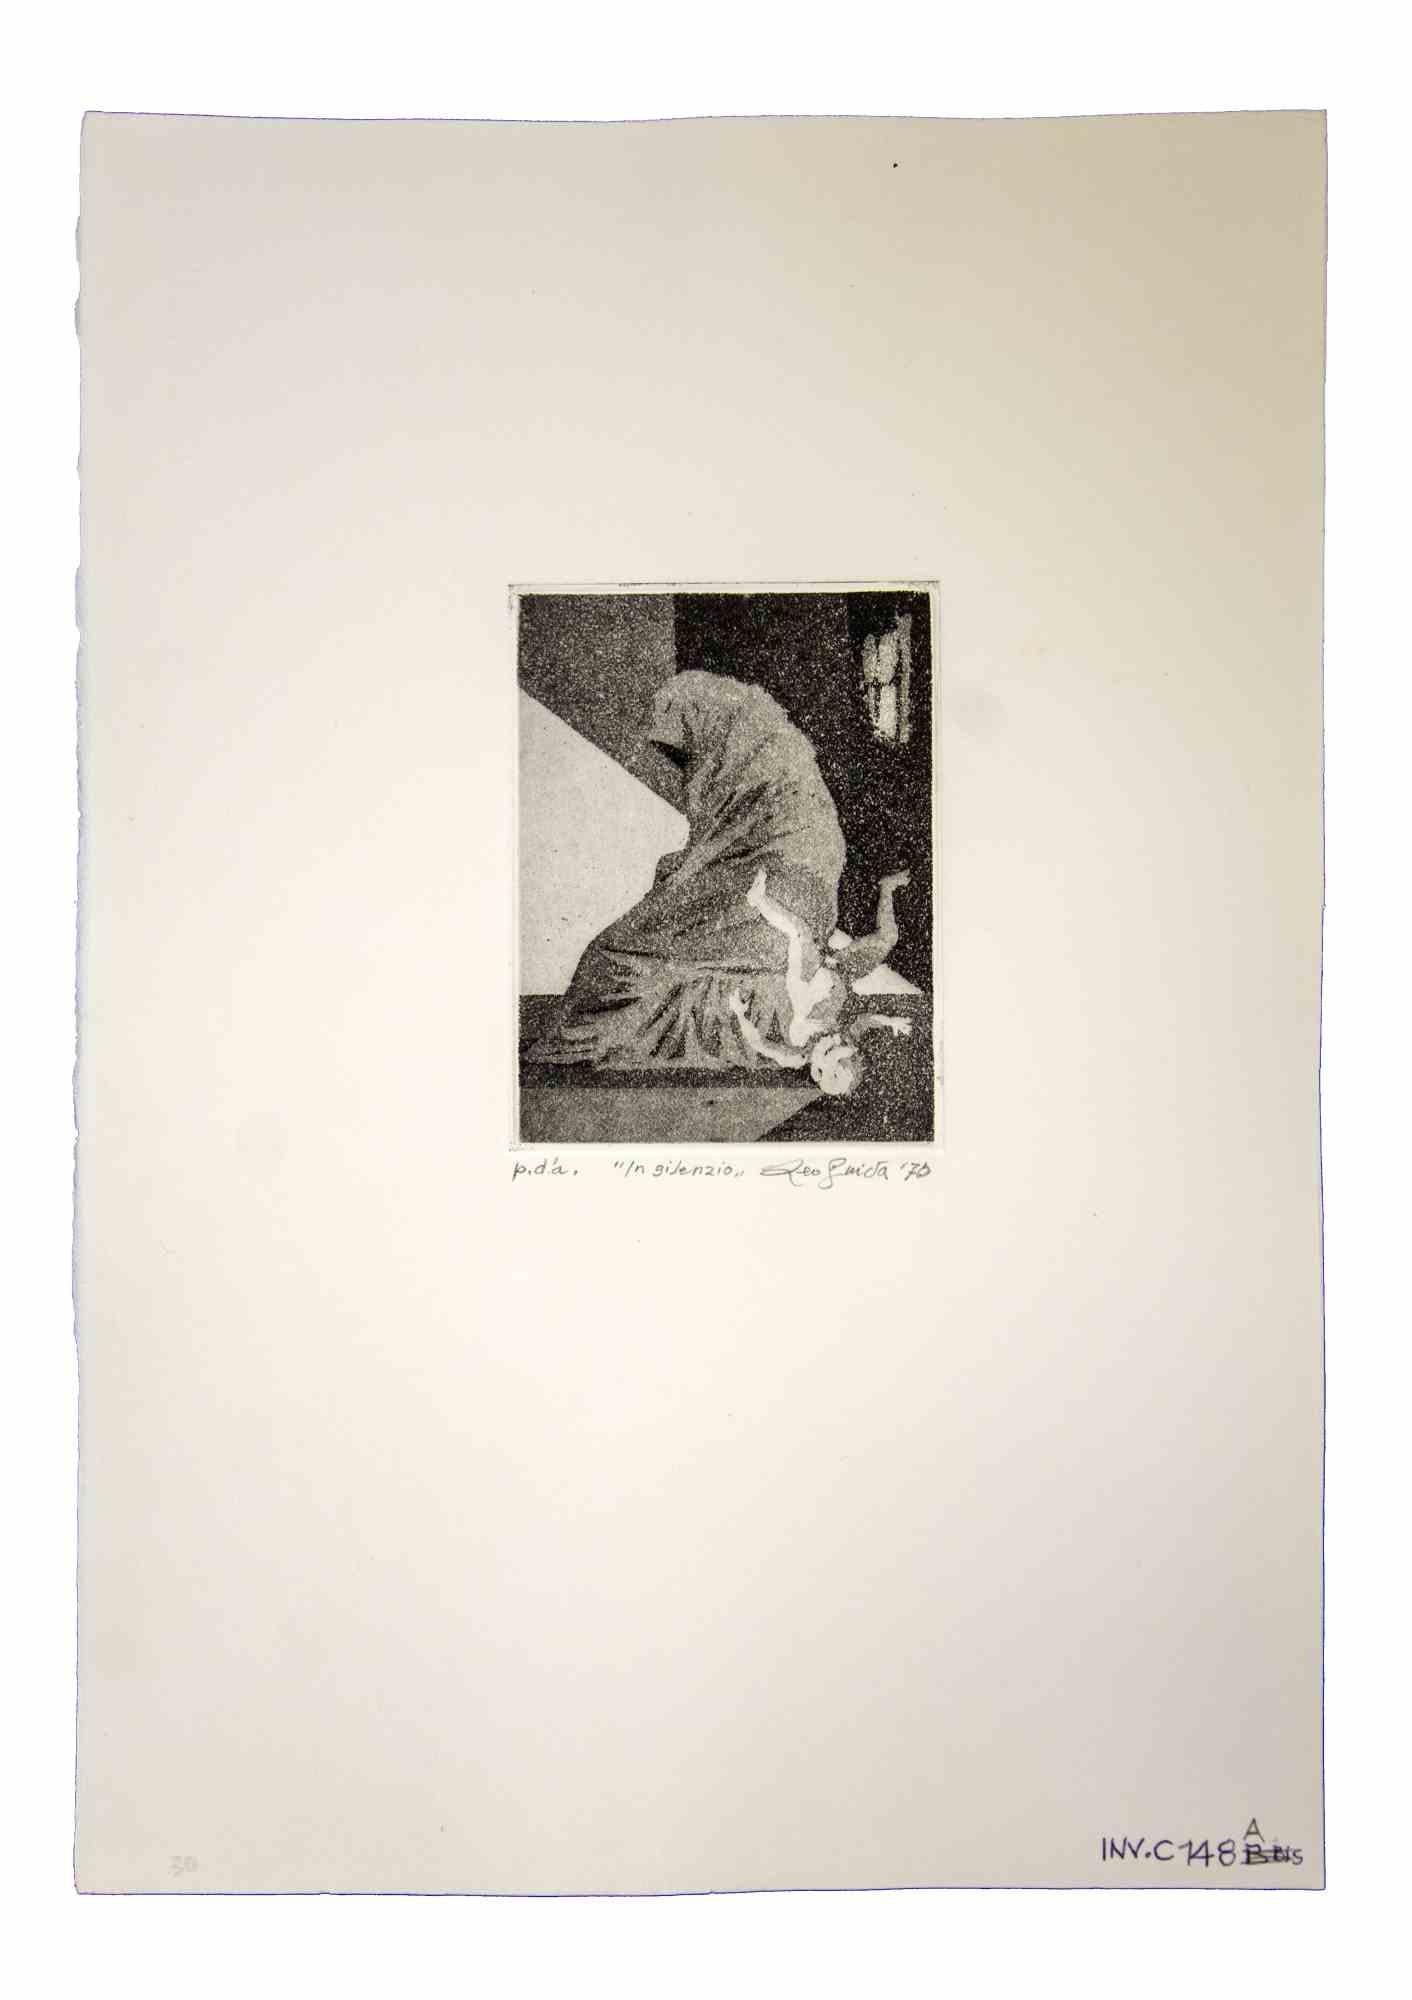 In Silence is an original artwork realized in the 1970s by the Italian Contemporary artist  Leo Guida  (1992 - 2017).

Original etching.

Good conditions.

Hand-signed

Artist's proof.

The artwork is depicted through strong strokes in well-balanced